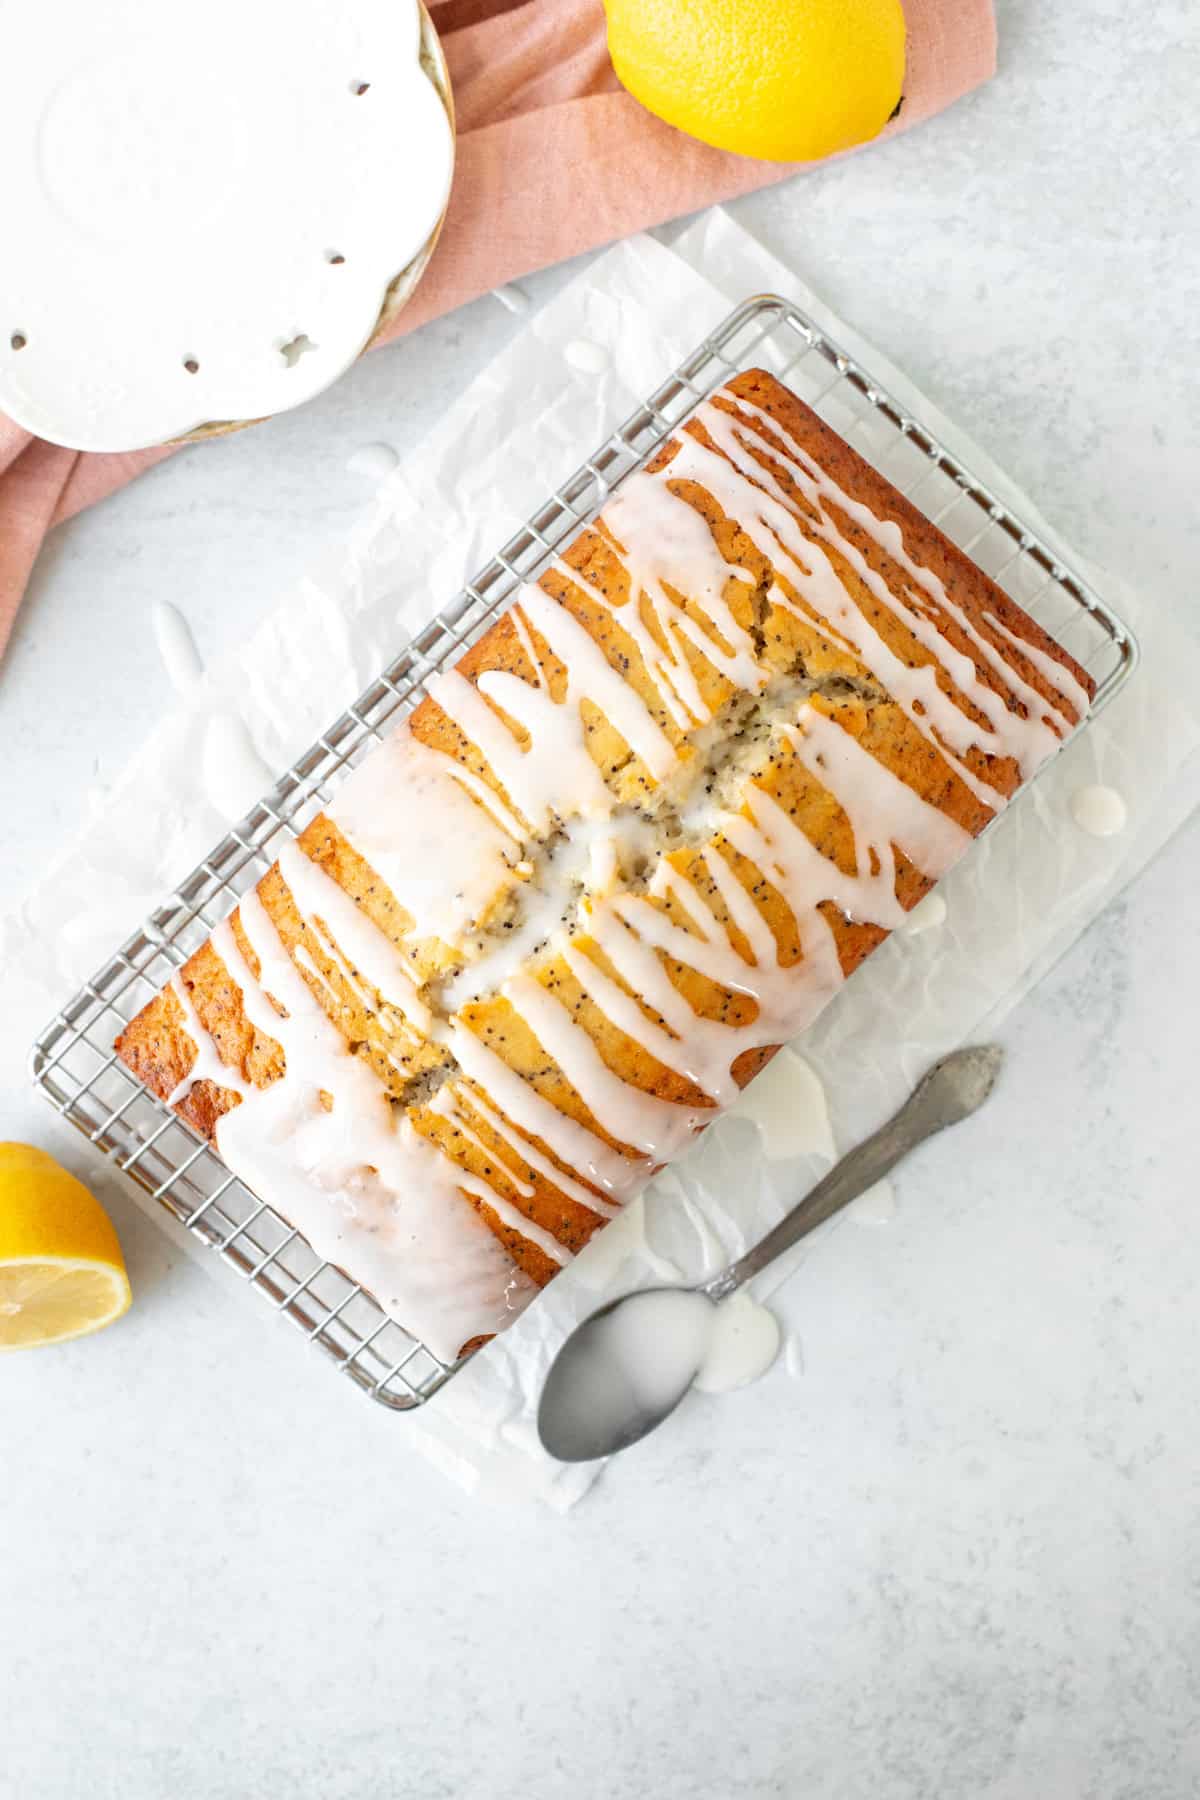 Lemon poppy seed loaf drizzled with lemon glaze, on a cooling rack